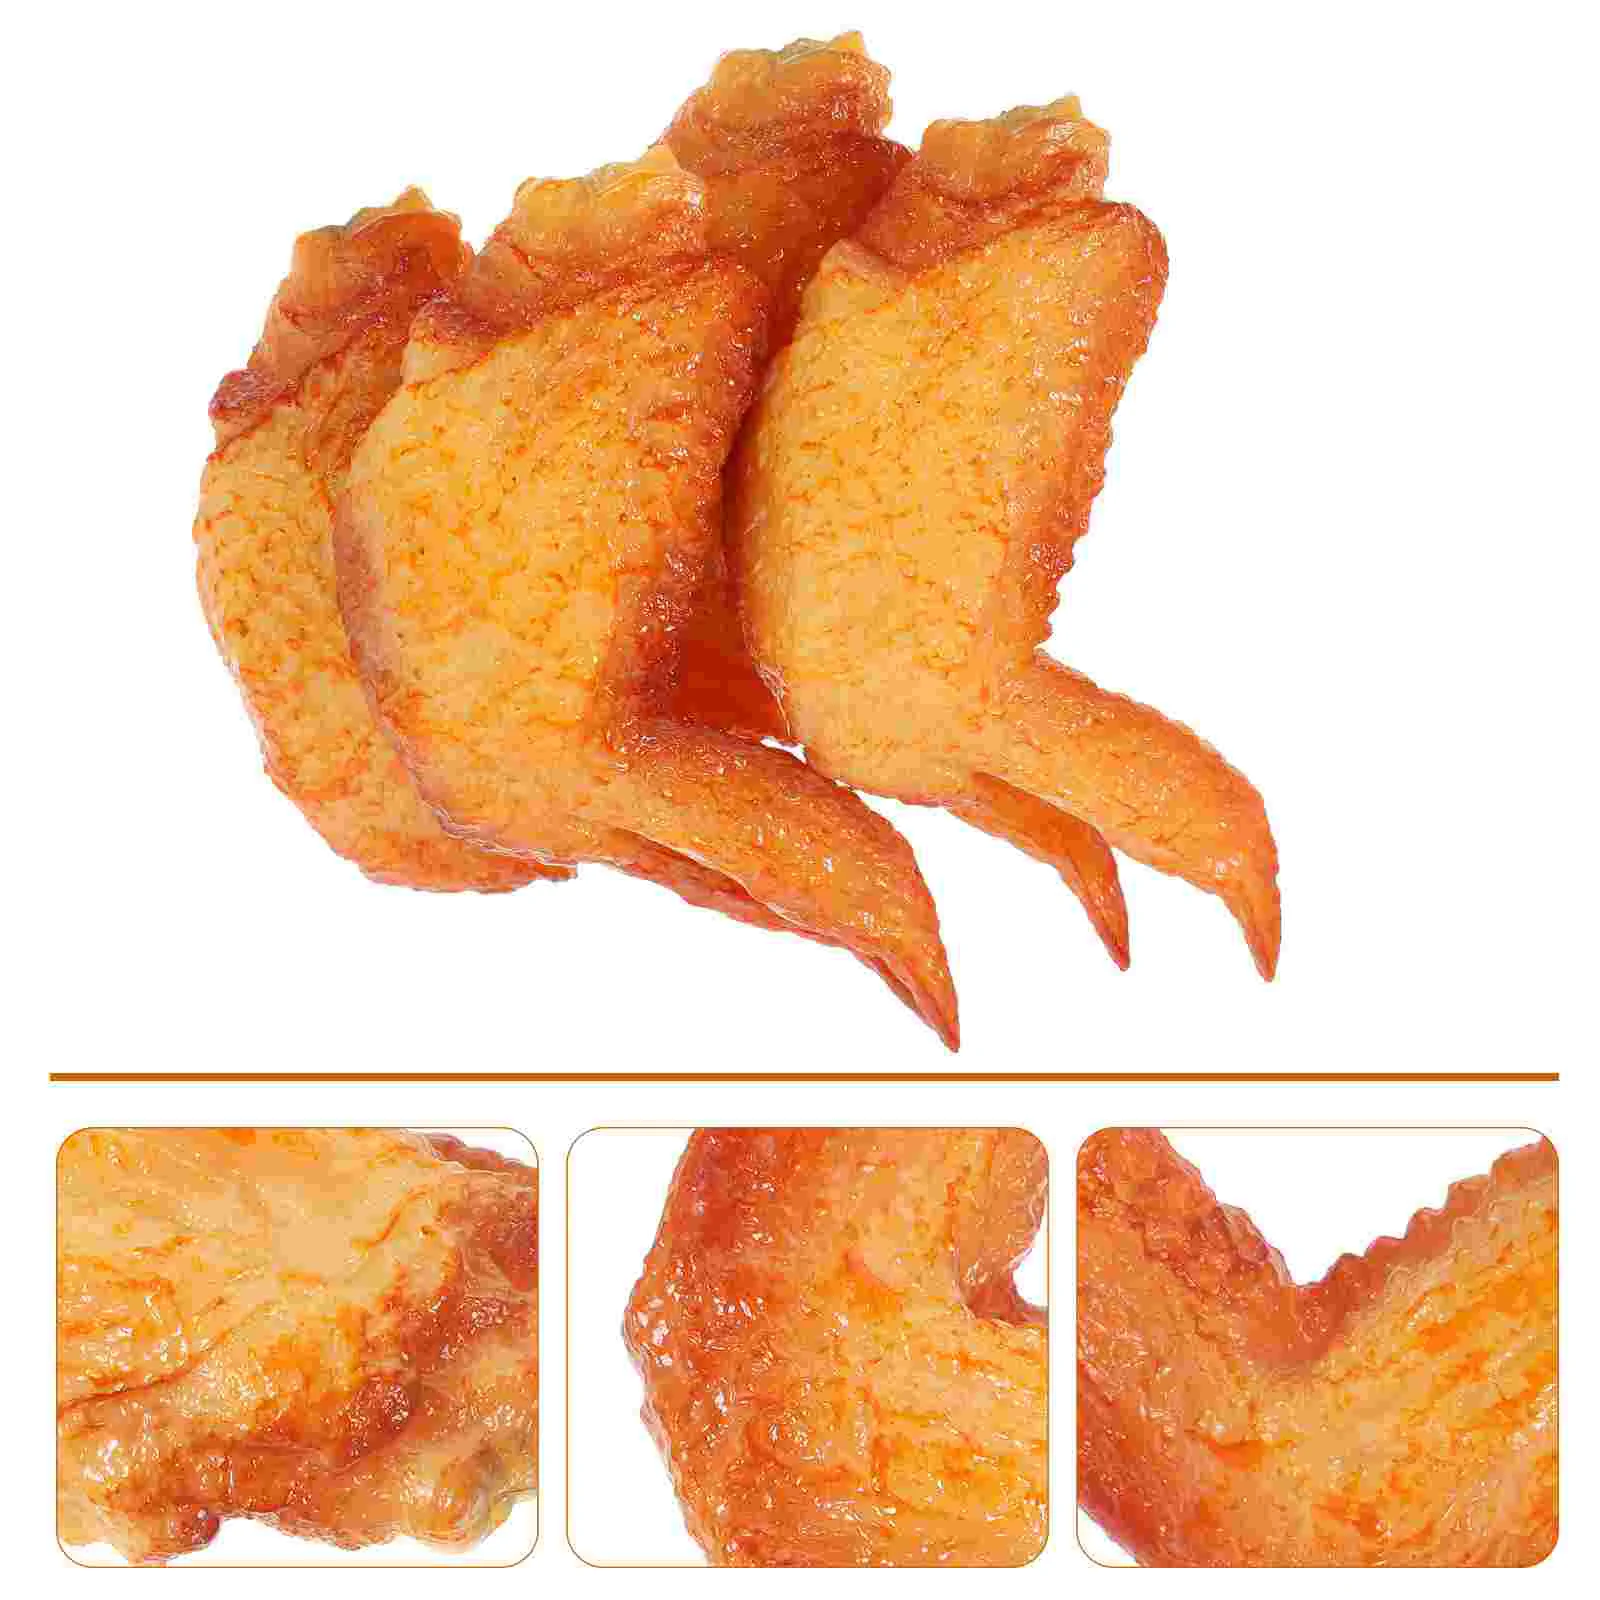 

4 Pcs Simulated Chicken Wings Drumsticks Model Realistic Play Food Fake Toy For Kids Pretend Pvc Meat Kids